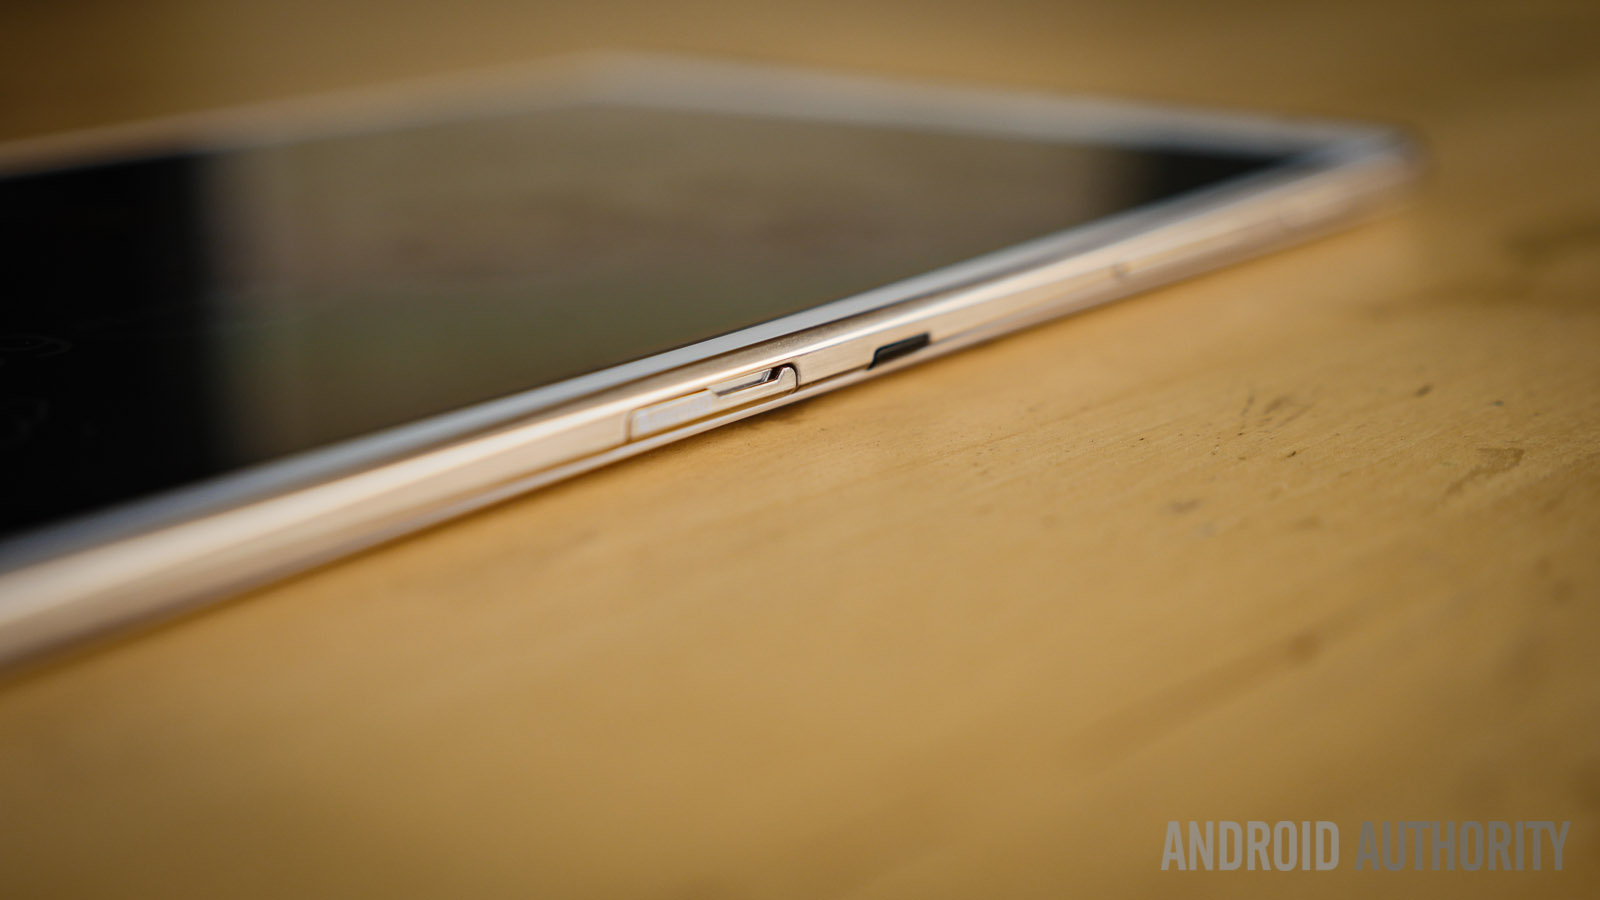 samsung galaxy tab s 8.4 review (10 of 27)